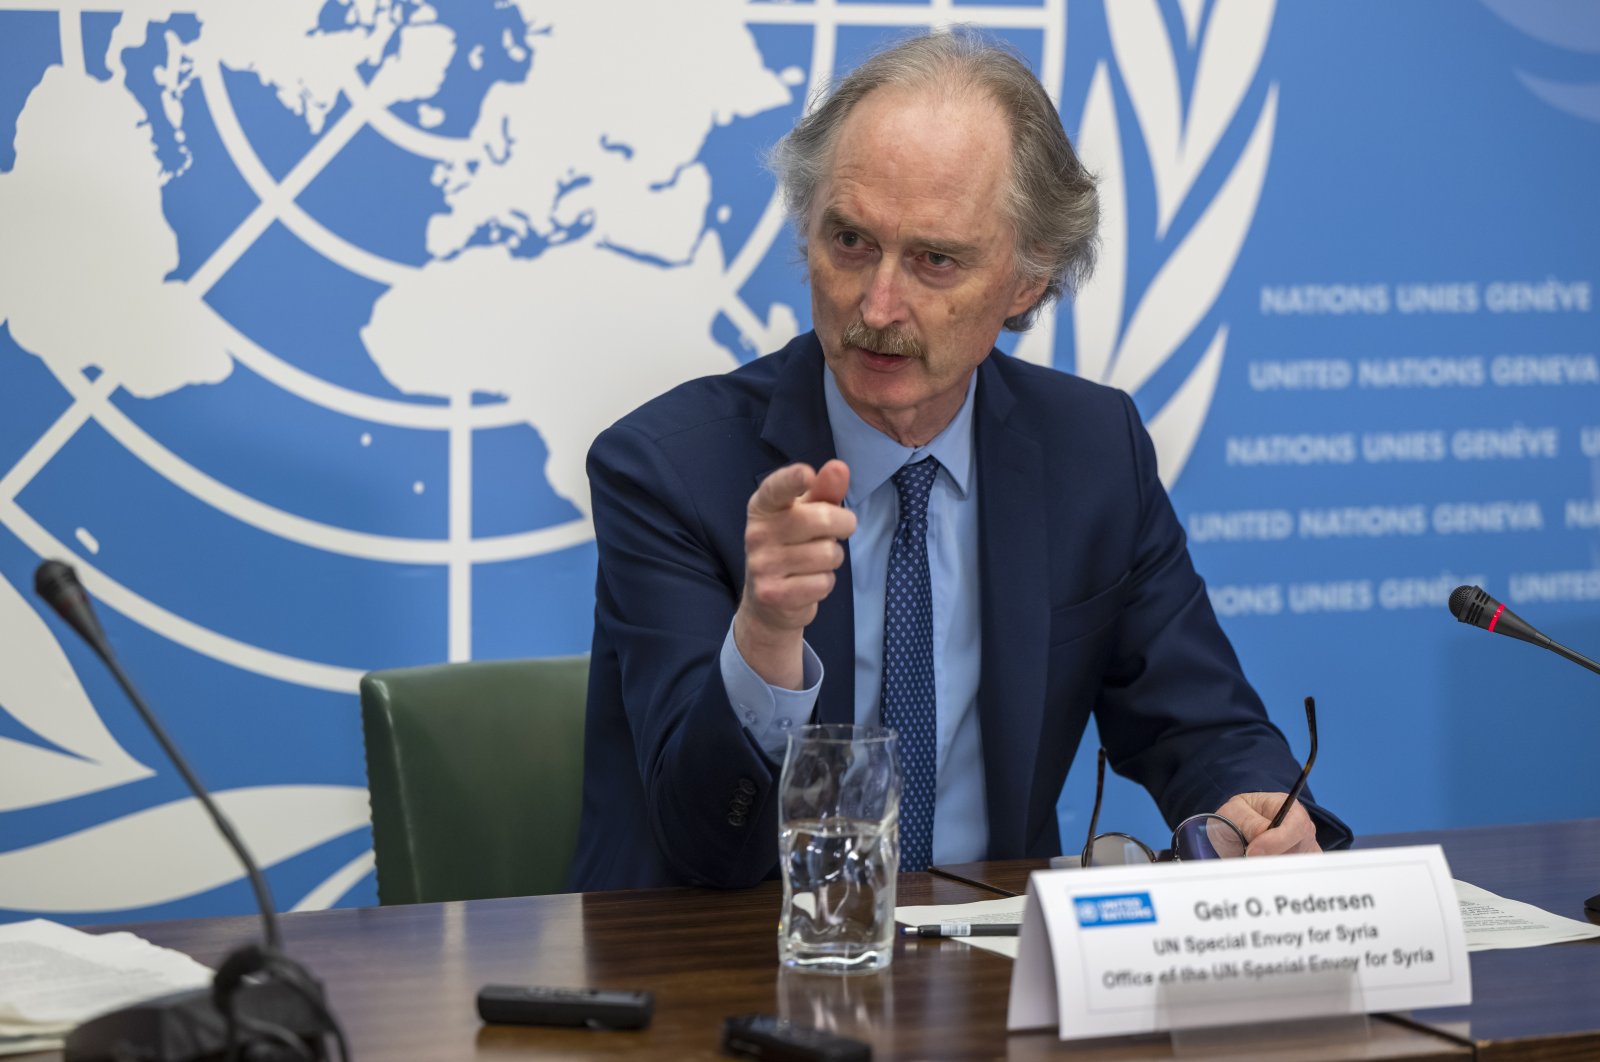 Geir O. Pedersen, U.N. Special Envoy for Syria, speaks about the update on the situation regarding Syria, during a news conference at the European headquarters of the United Nations in Geneva, Switzerland, March 8, 2023.  (EPA Photo)